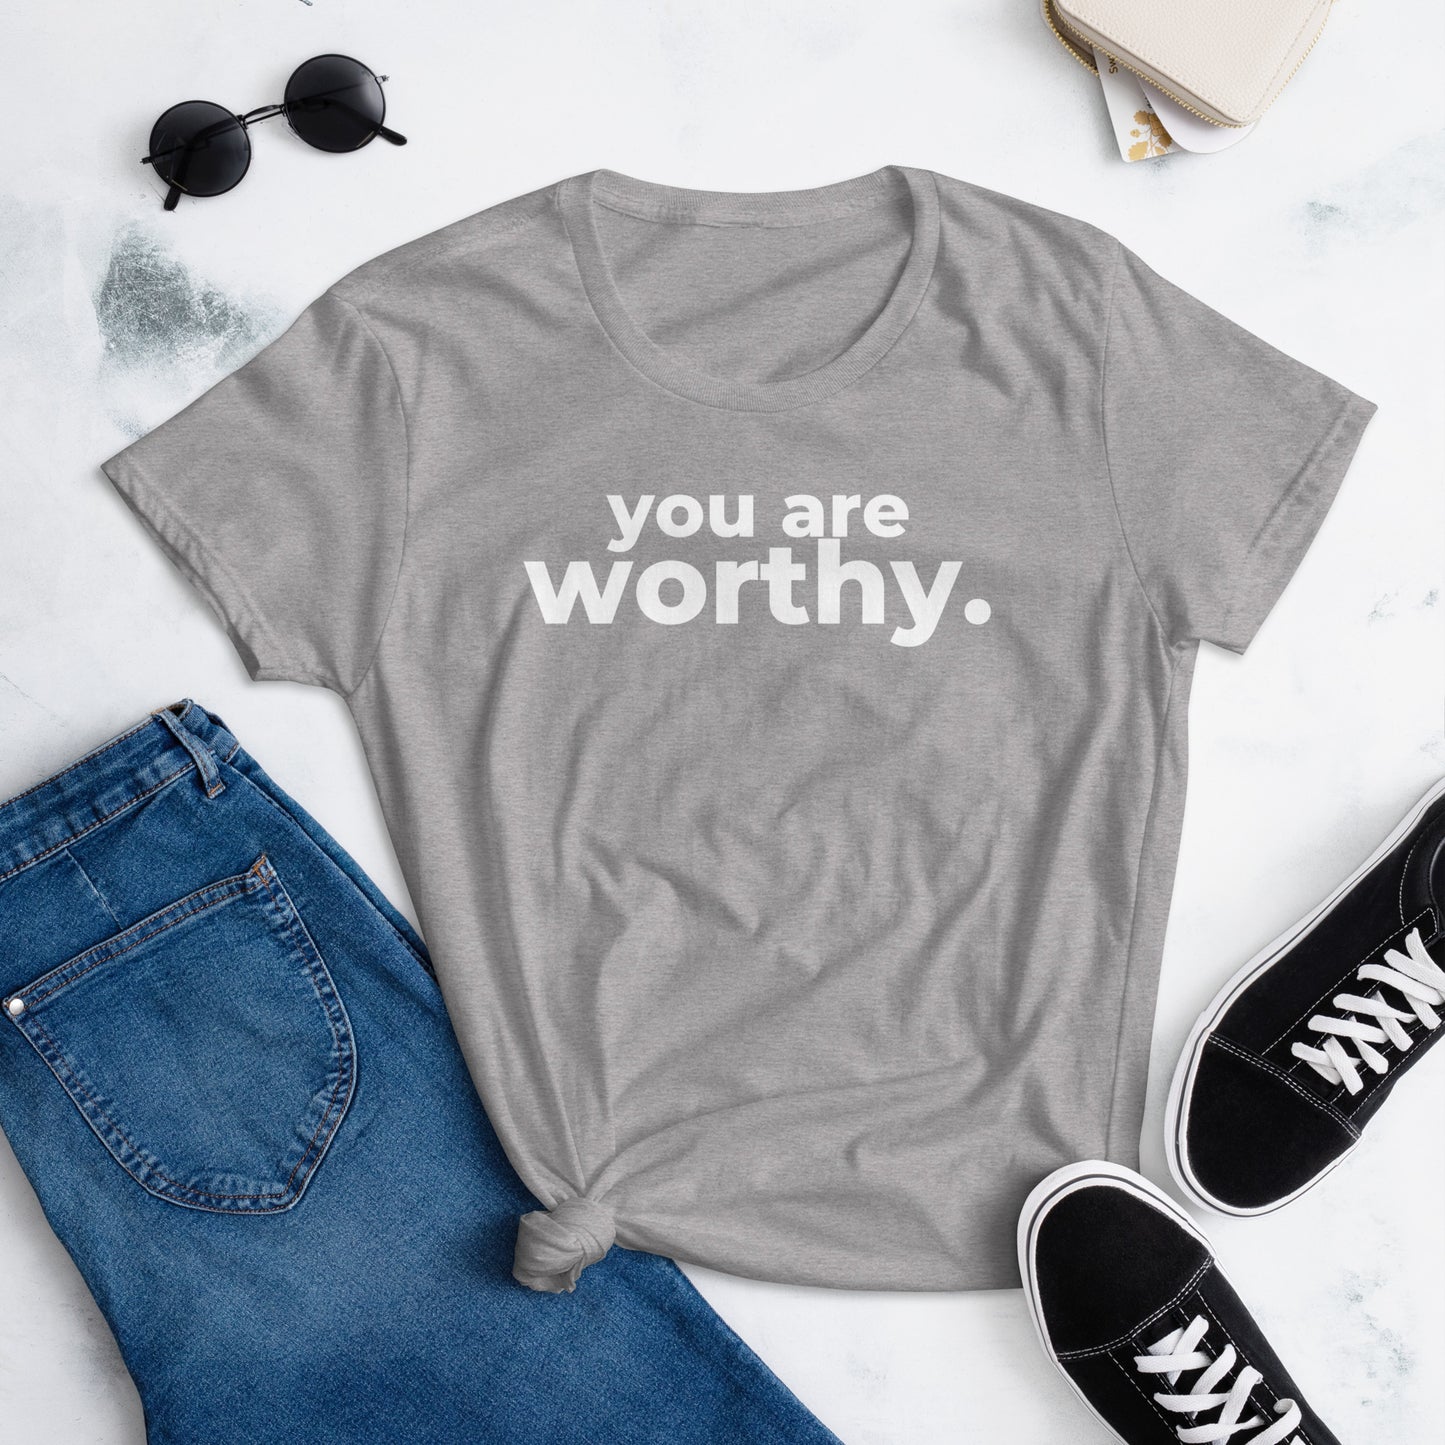 You are Worthy - Women's short sleeve t-shirt